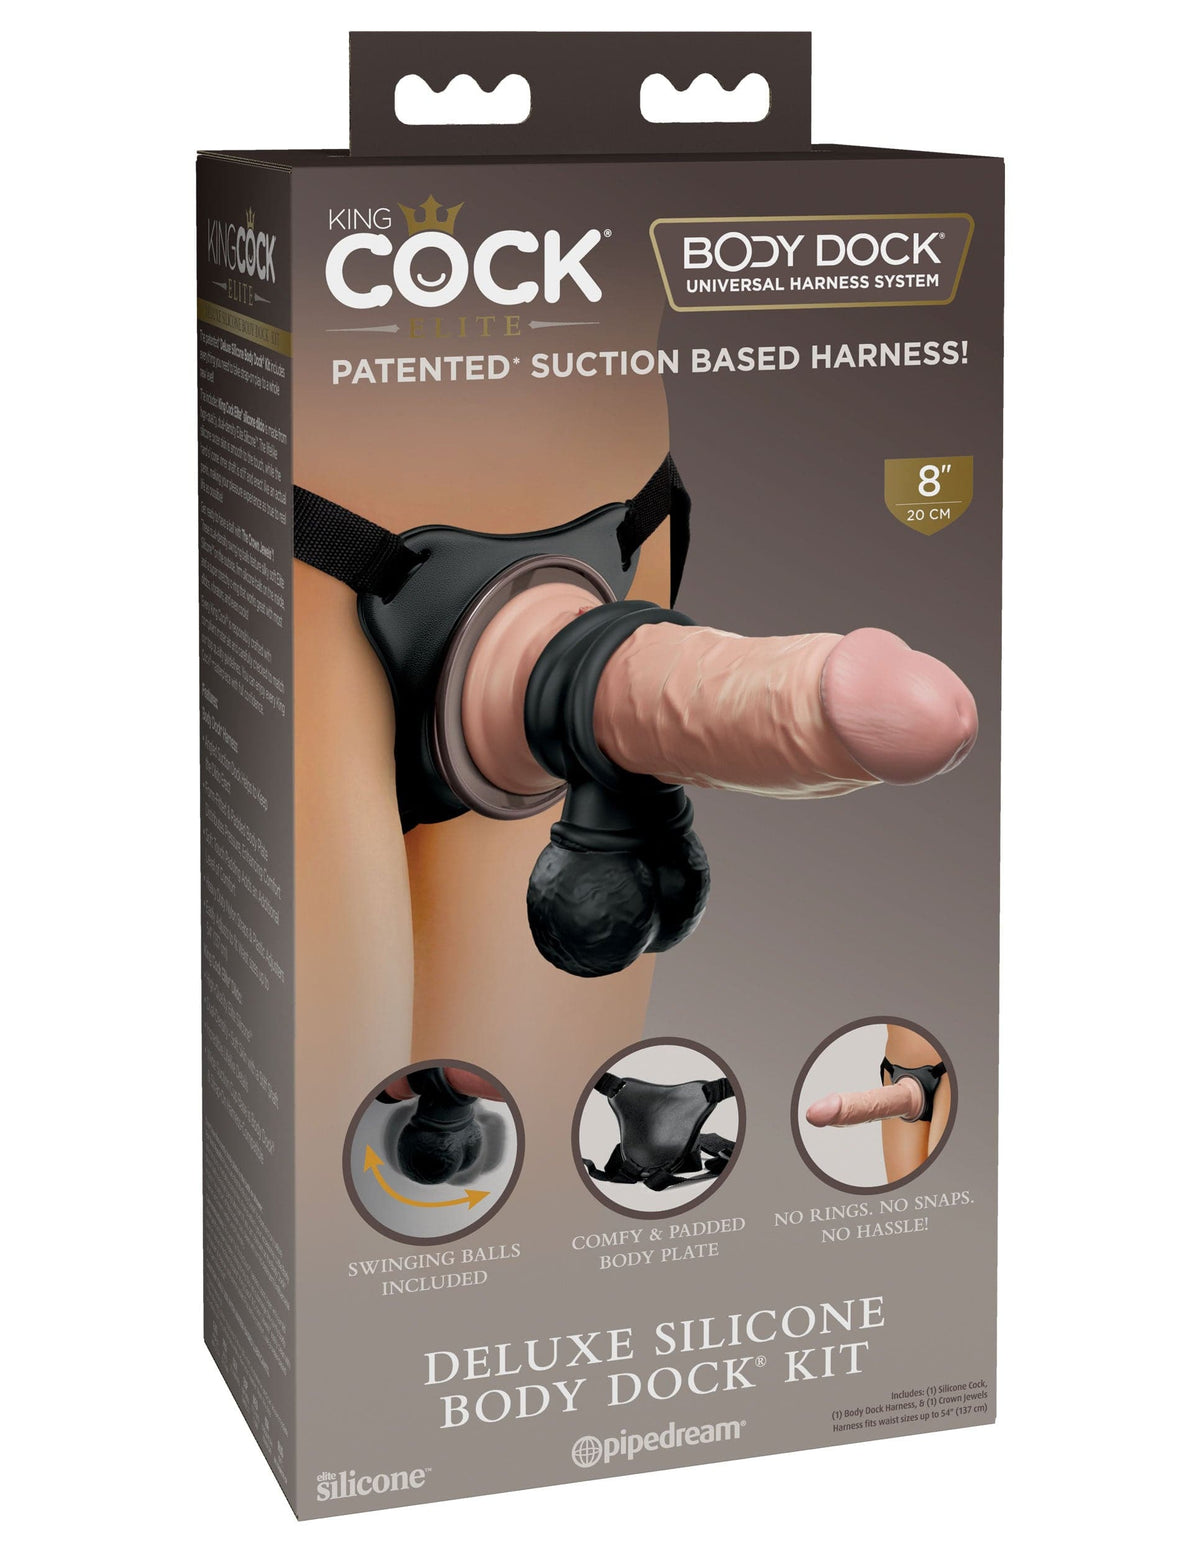 king cock elite deluxe silicone body dock kit harness and 8 inch dildo light